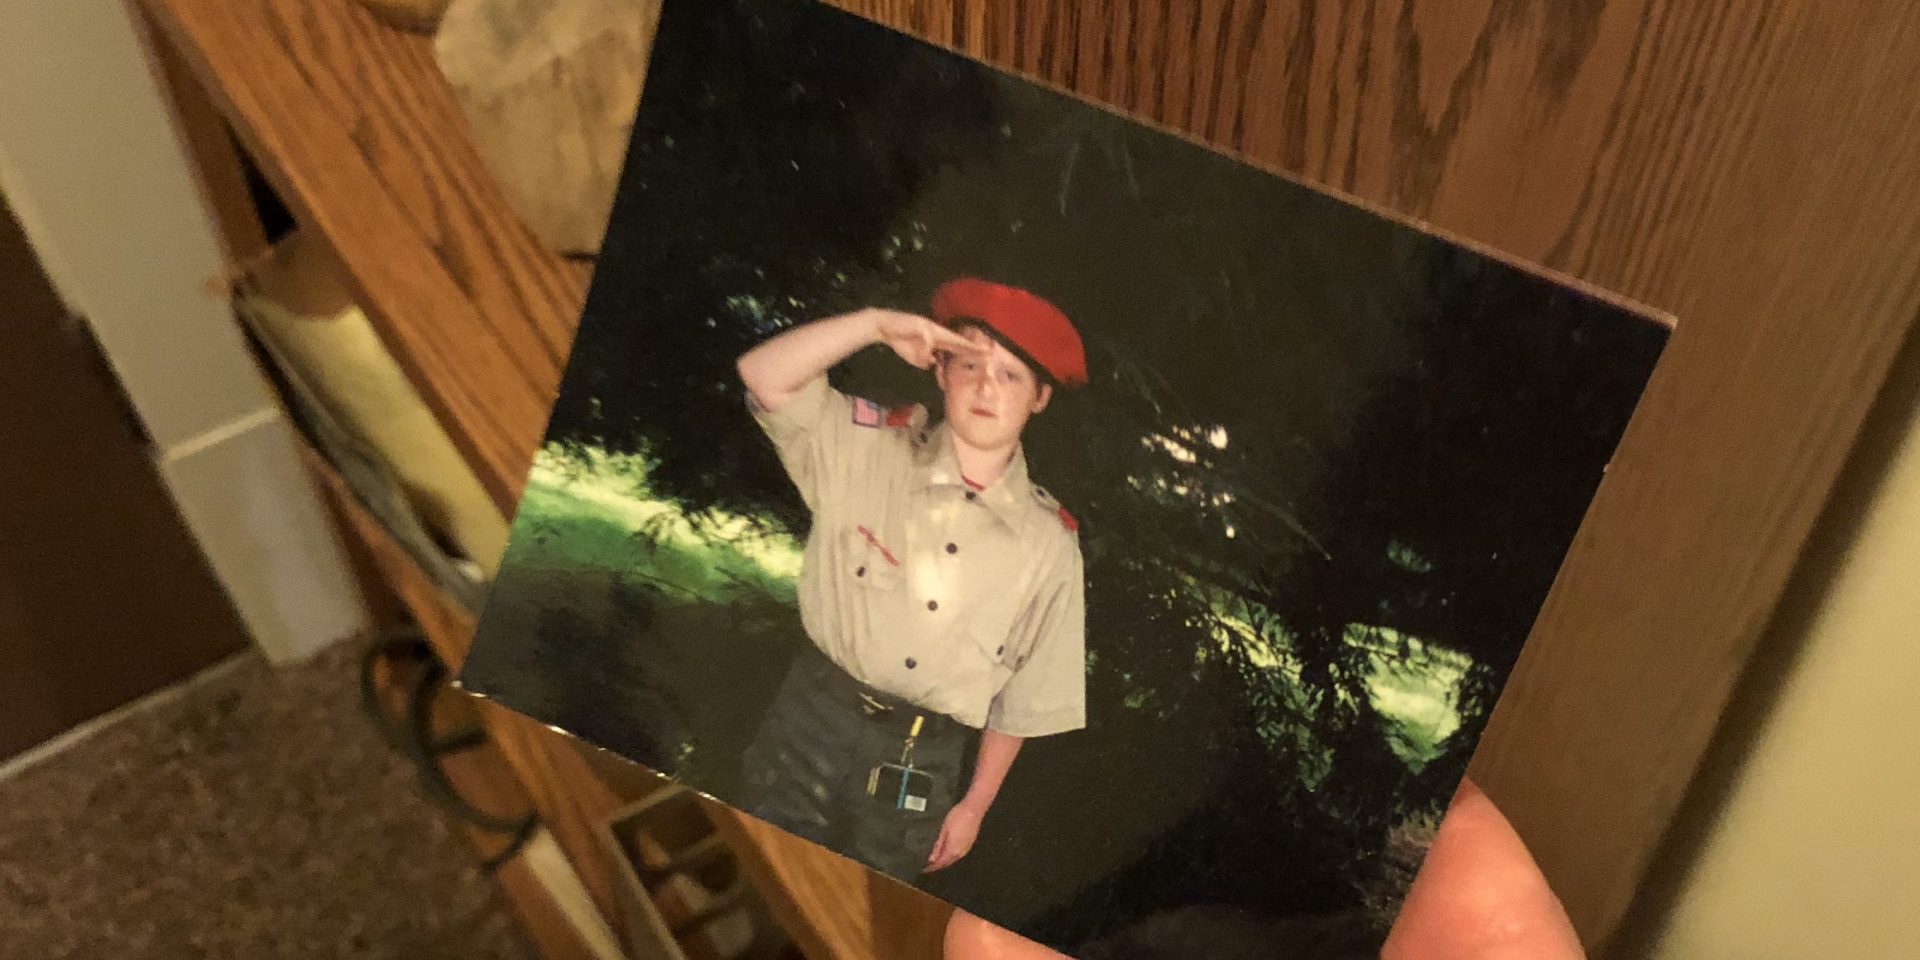 Dylan Elchin is seen as a child in this photograph, wearing a Boy Scout uniform and red beret. Years later, he would earn the honor of wearing a scarlet beret as a combat controller in the Air Force.